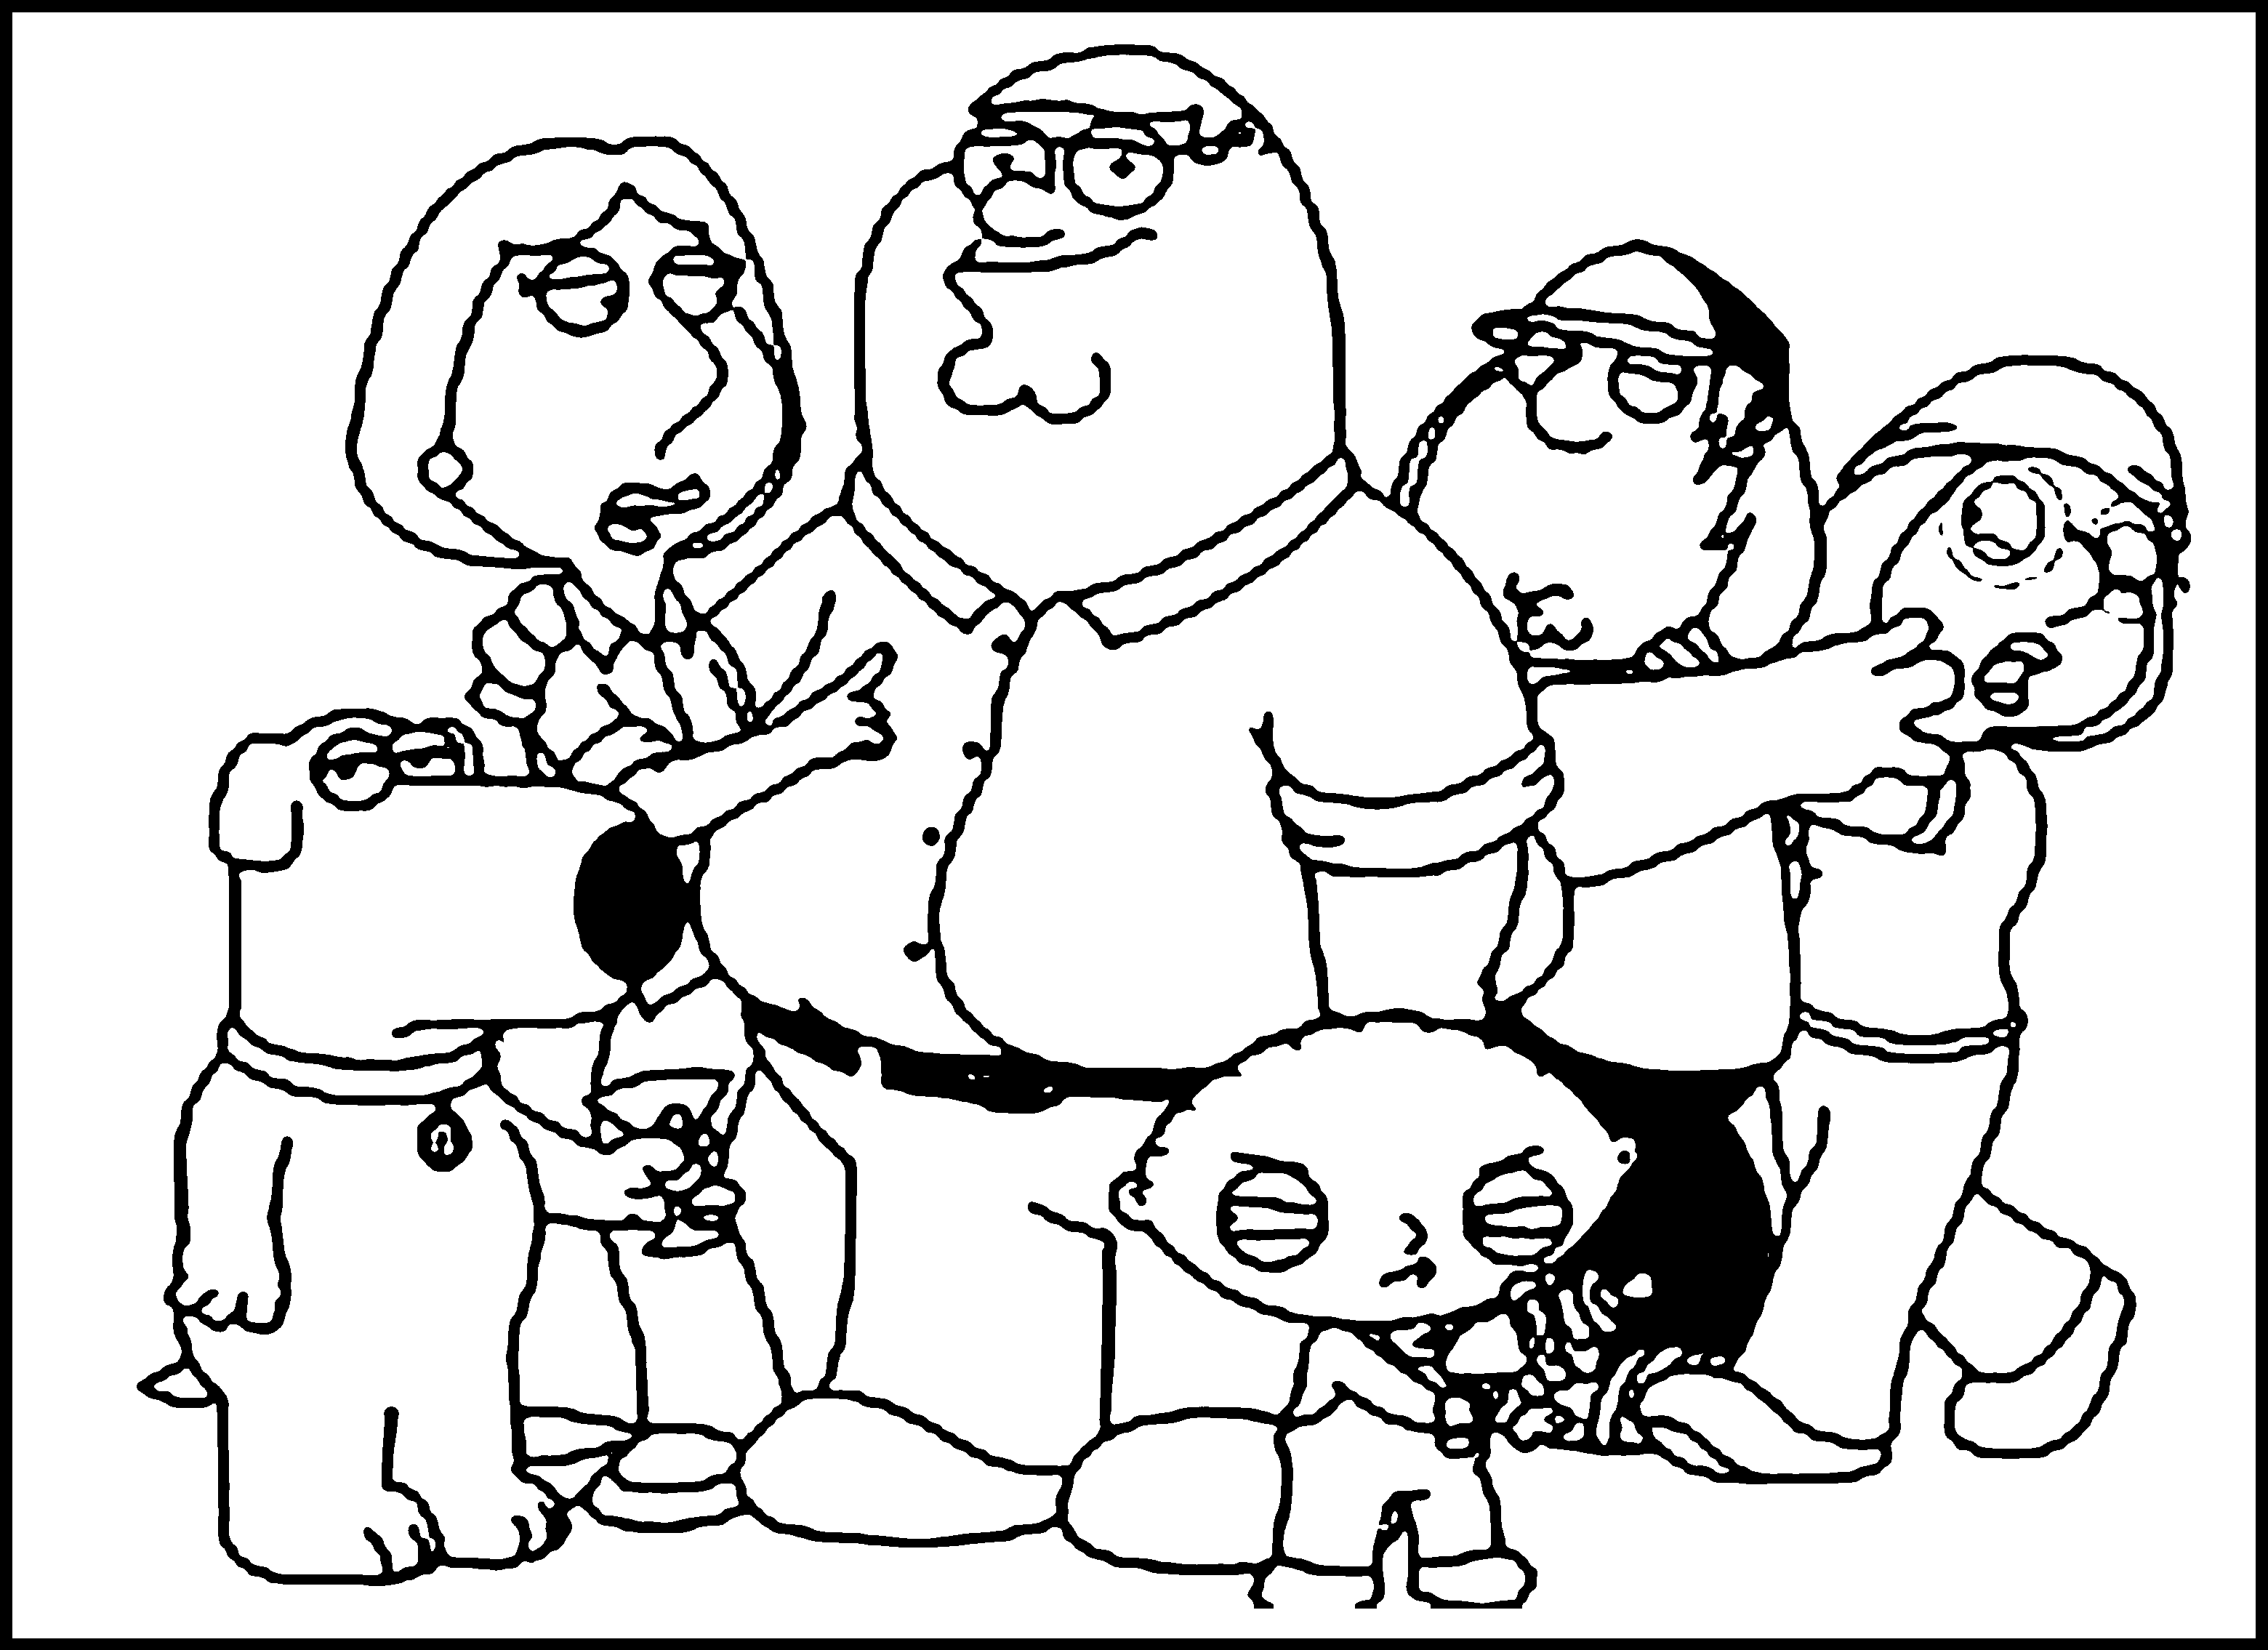 Coloring Pages Of Family - Coloring Home